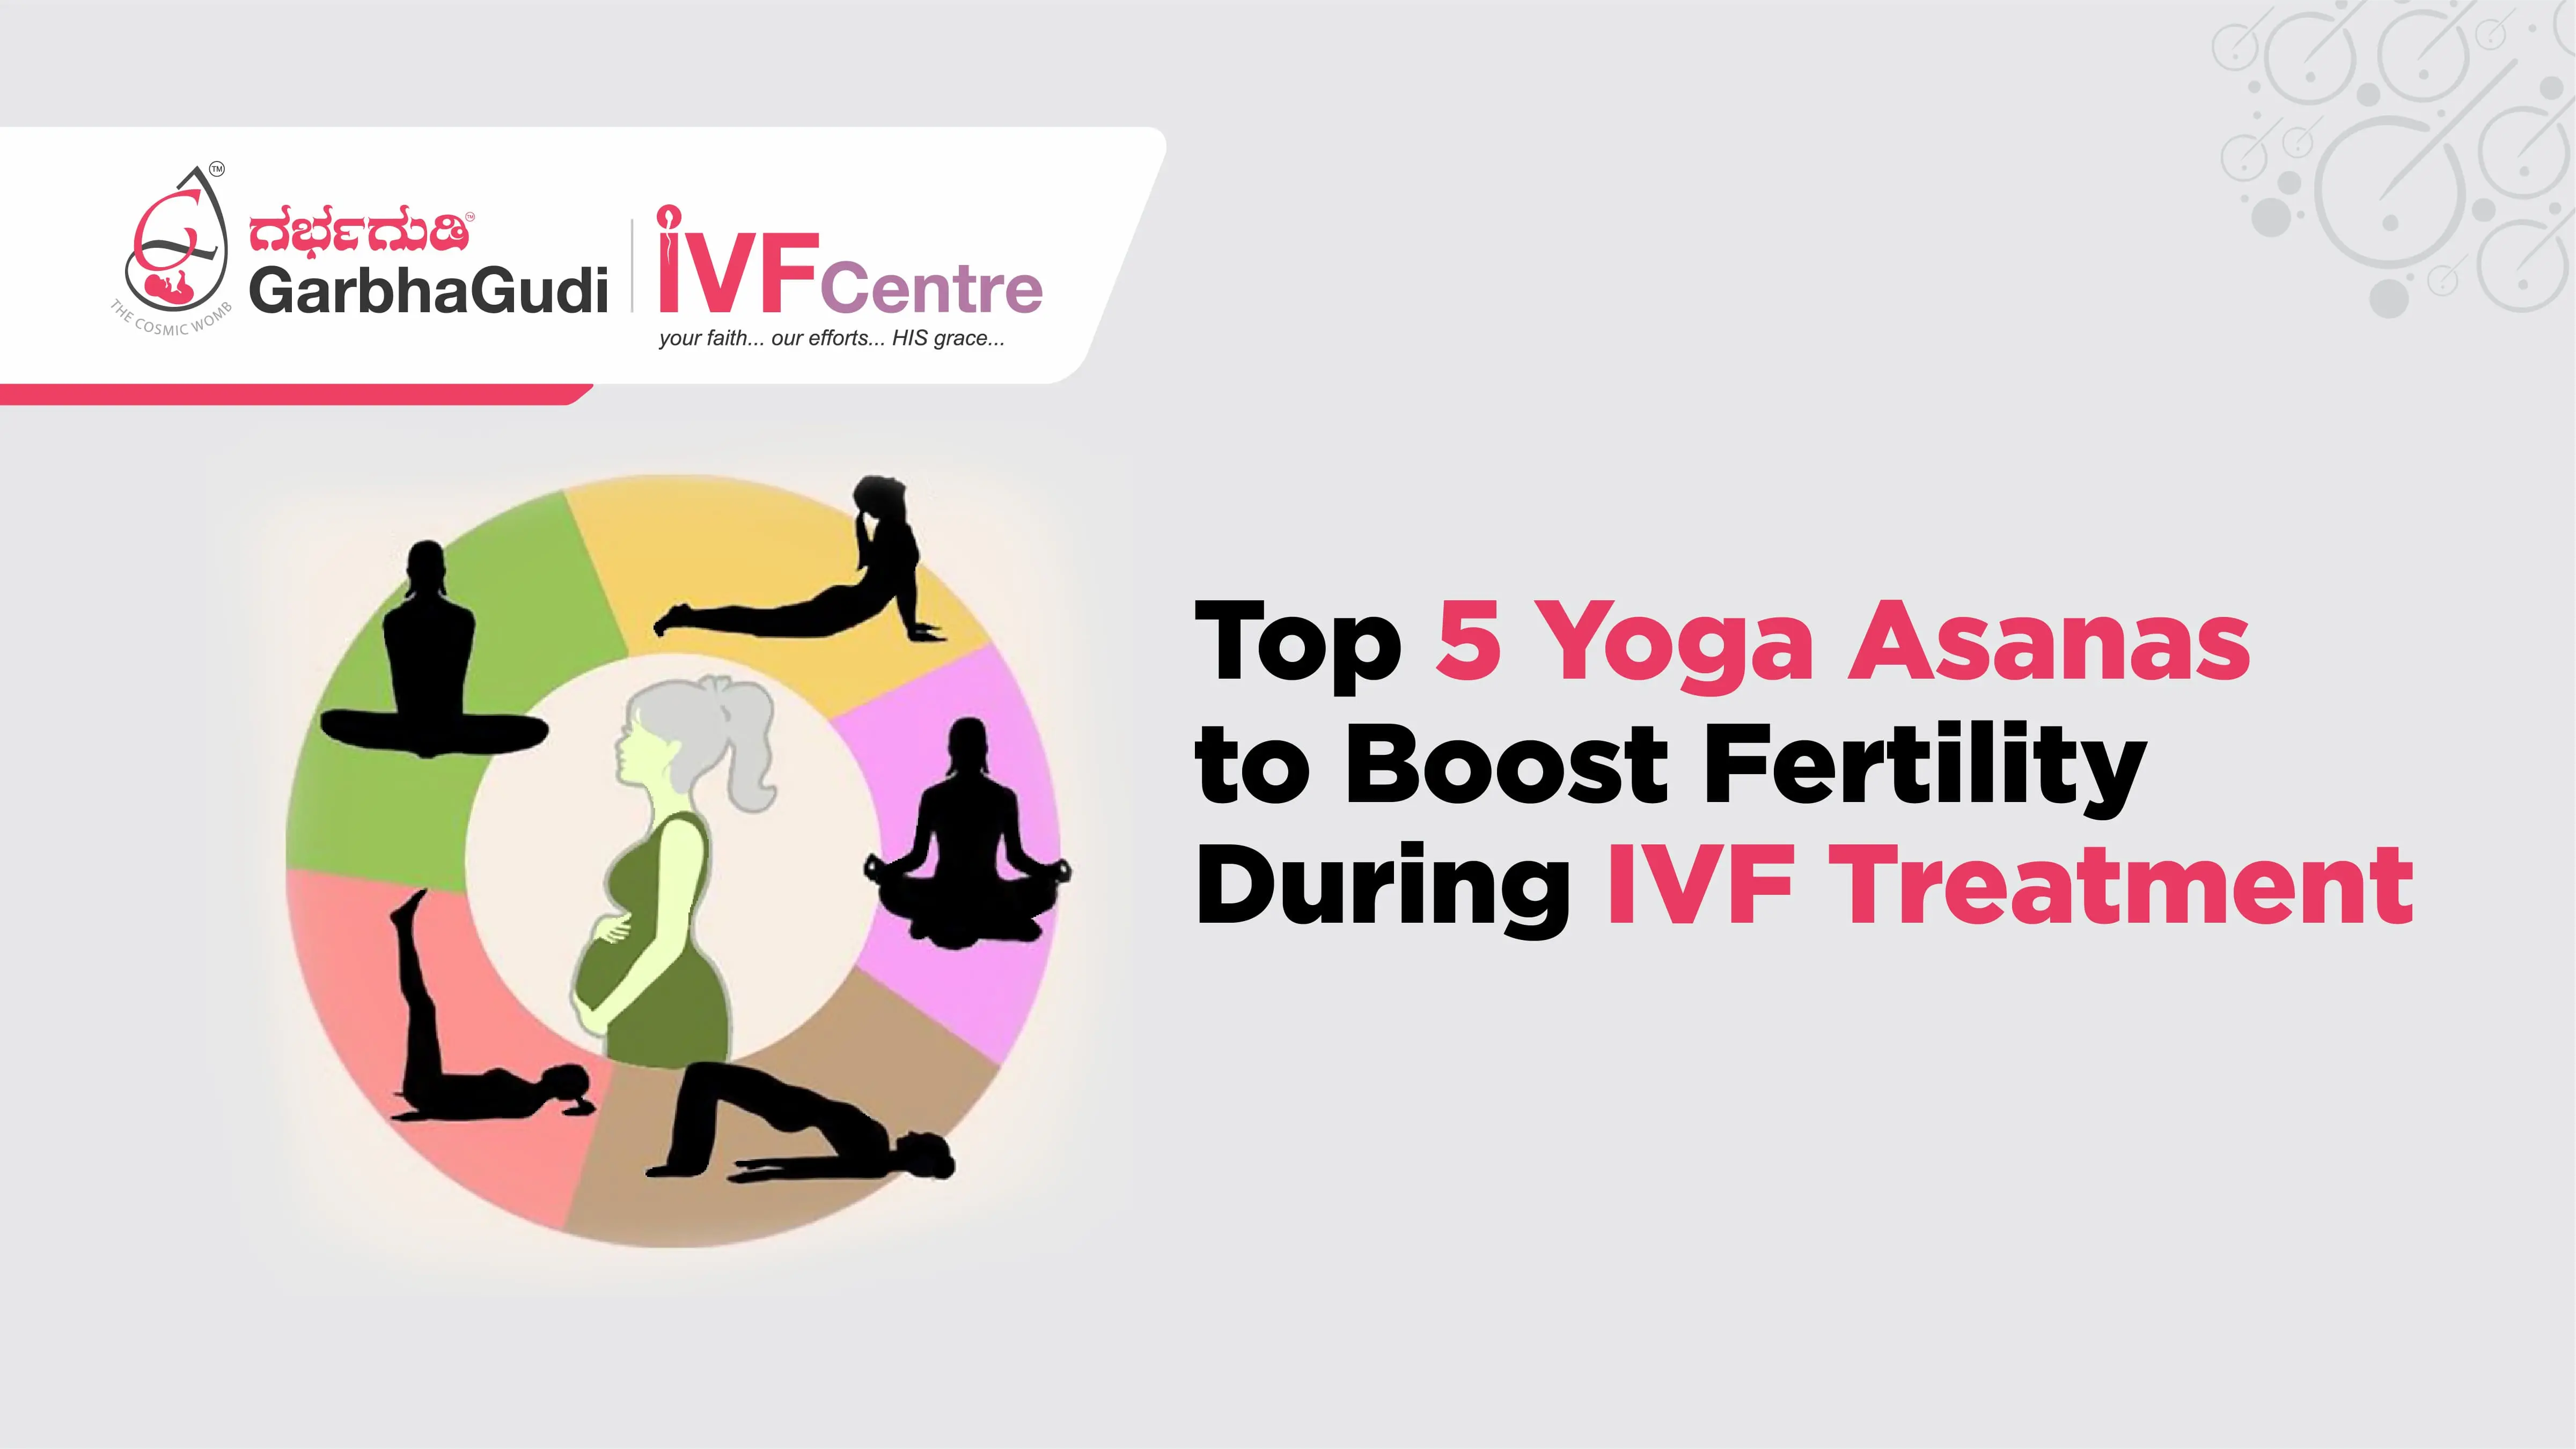 Top 5 Asanas to Boost Fertility During IVF Treatment